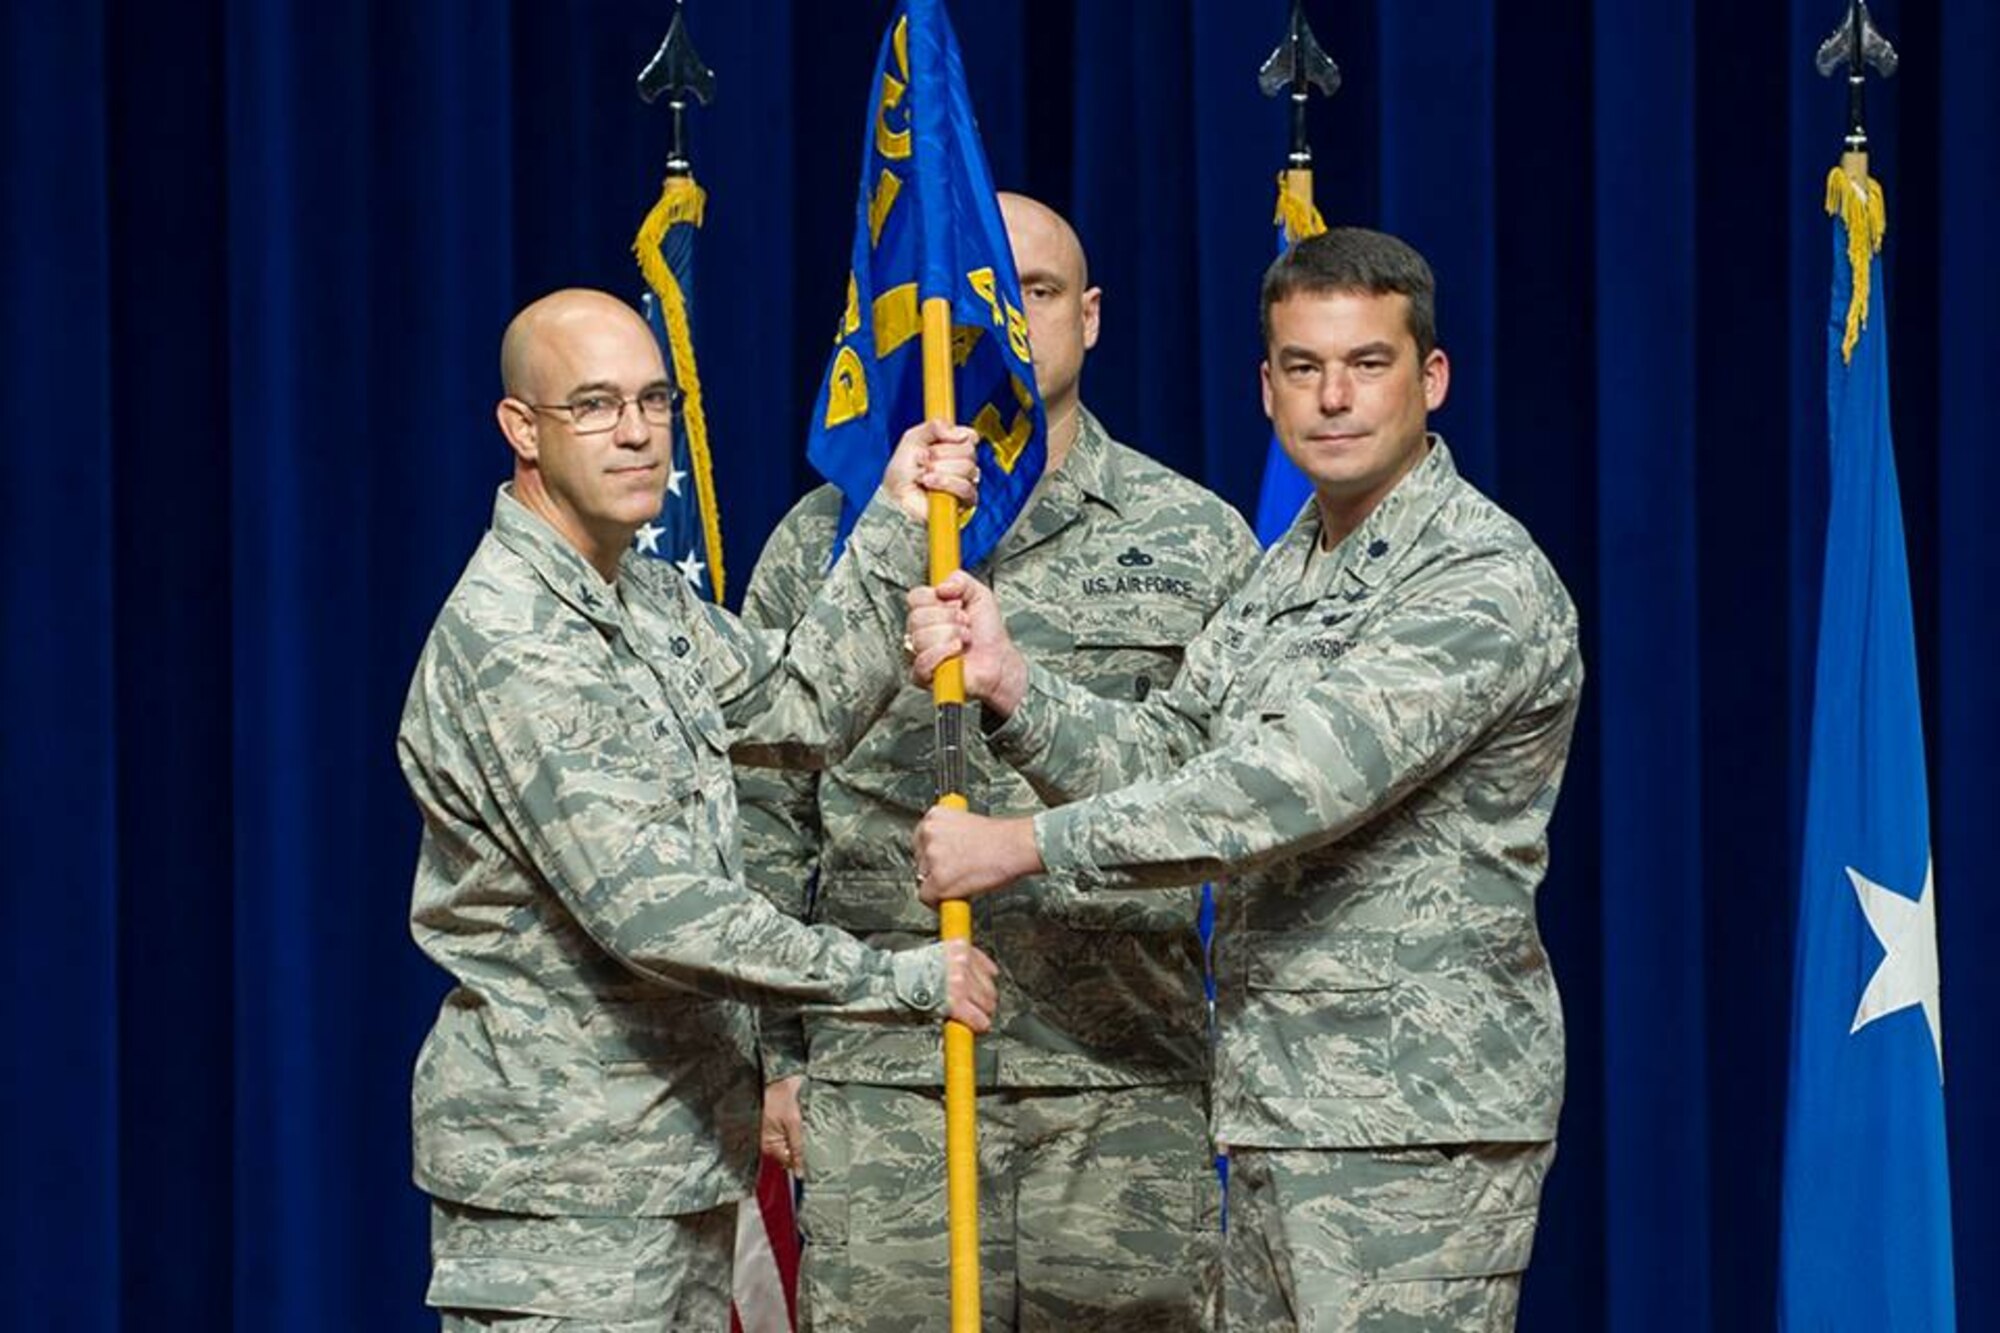 Col. Steven Lang, commander of the 45th OG, presents Lt. Col. Waylon Mitchell, commander of the 5th Space Launch Squadron, with the 5th SLS guidon, July 31, 2018 at Patrick Air Force Base, Fla. The 45th Launch Support Squadron inactivated and merged, combining their launch mission and personnel into the 5th Space Launch Squadron. (U.S. Air Force photo by Phillip Sunkel)